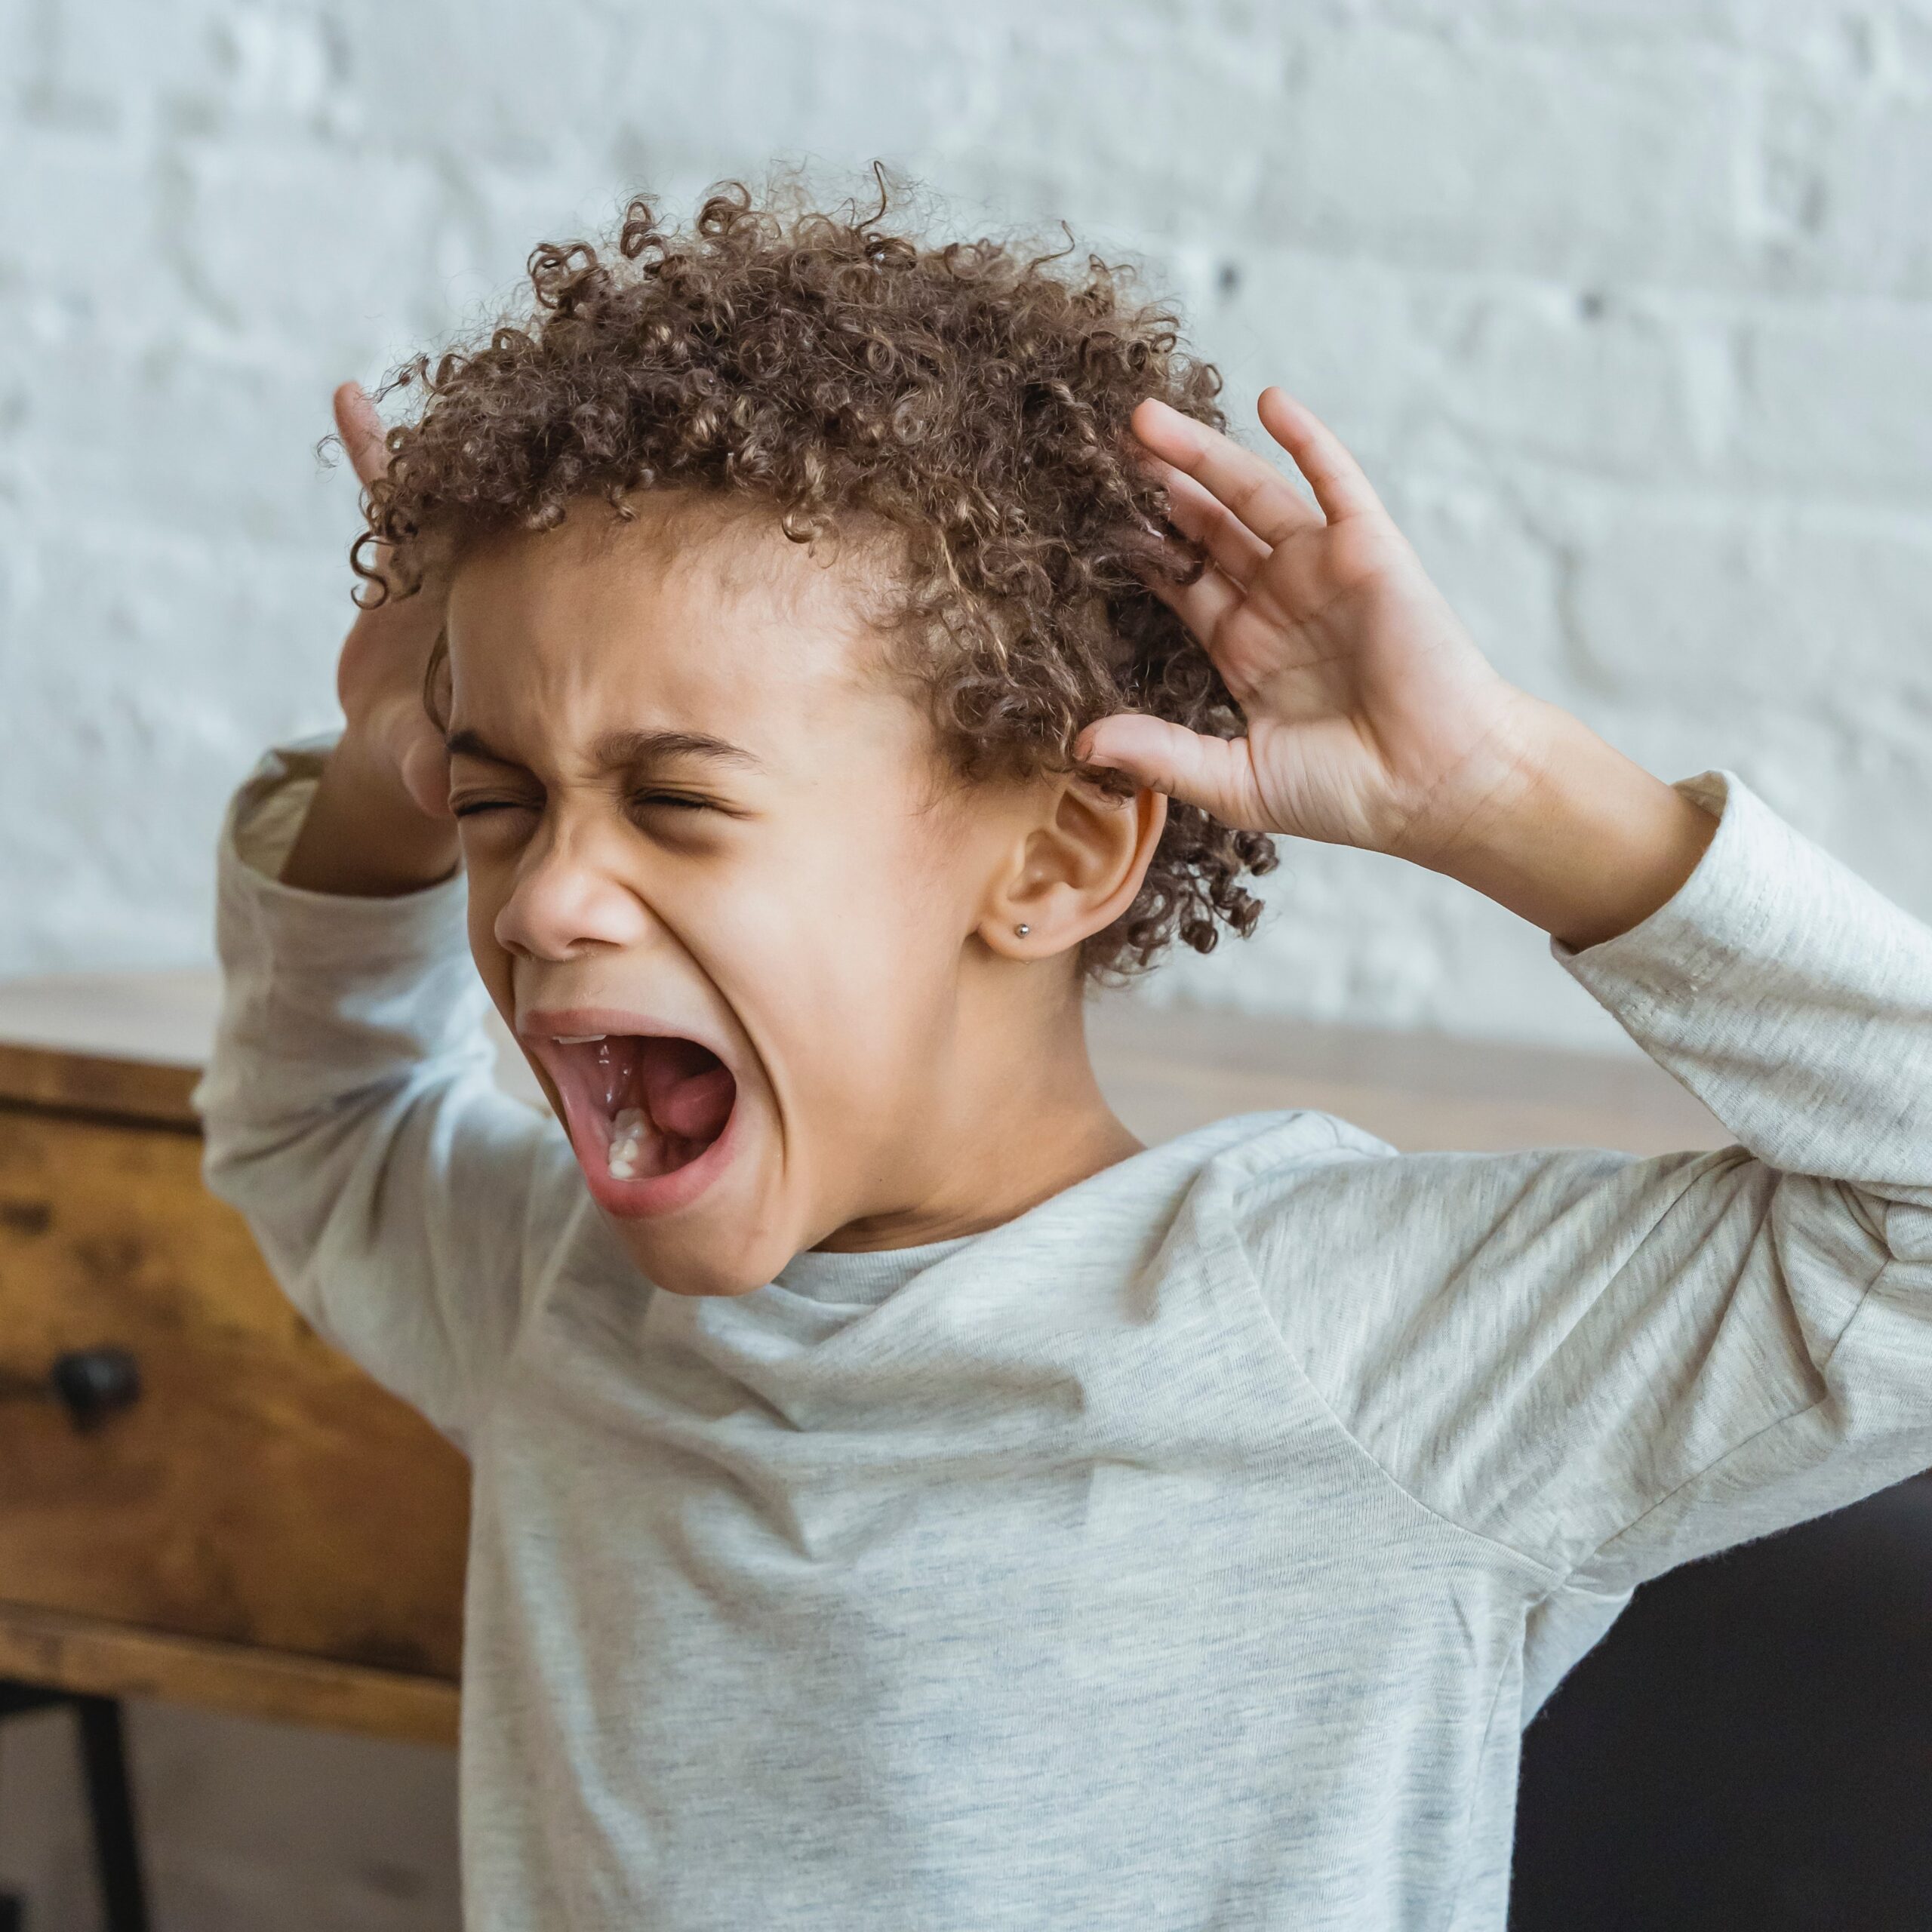 Don’t Blow Up: How to Help Your Kids Manage Anger by Trusting God